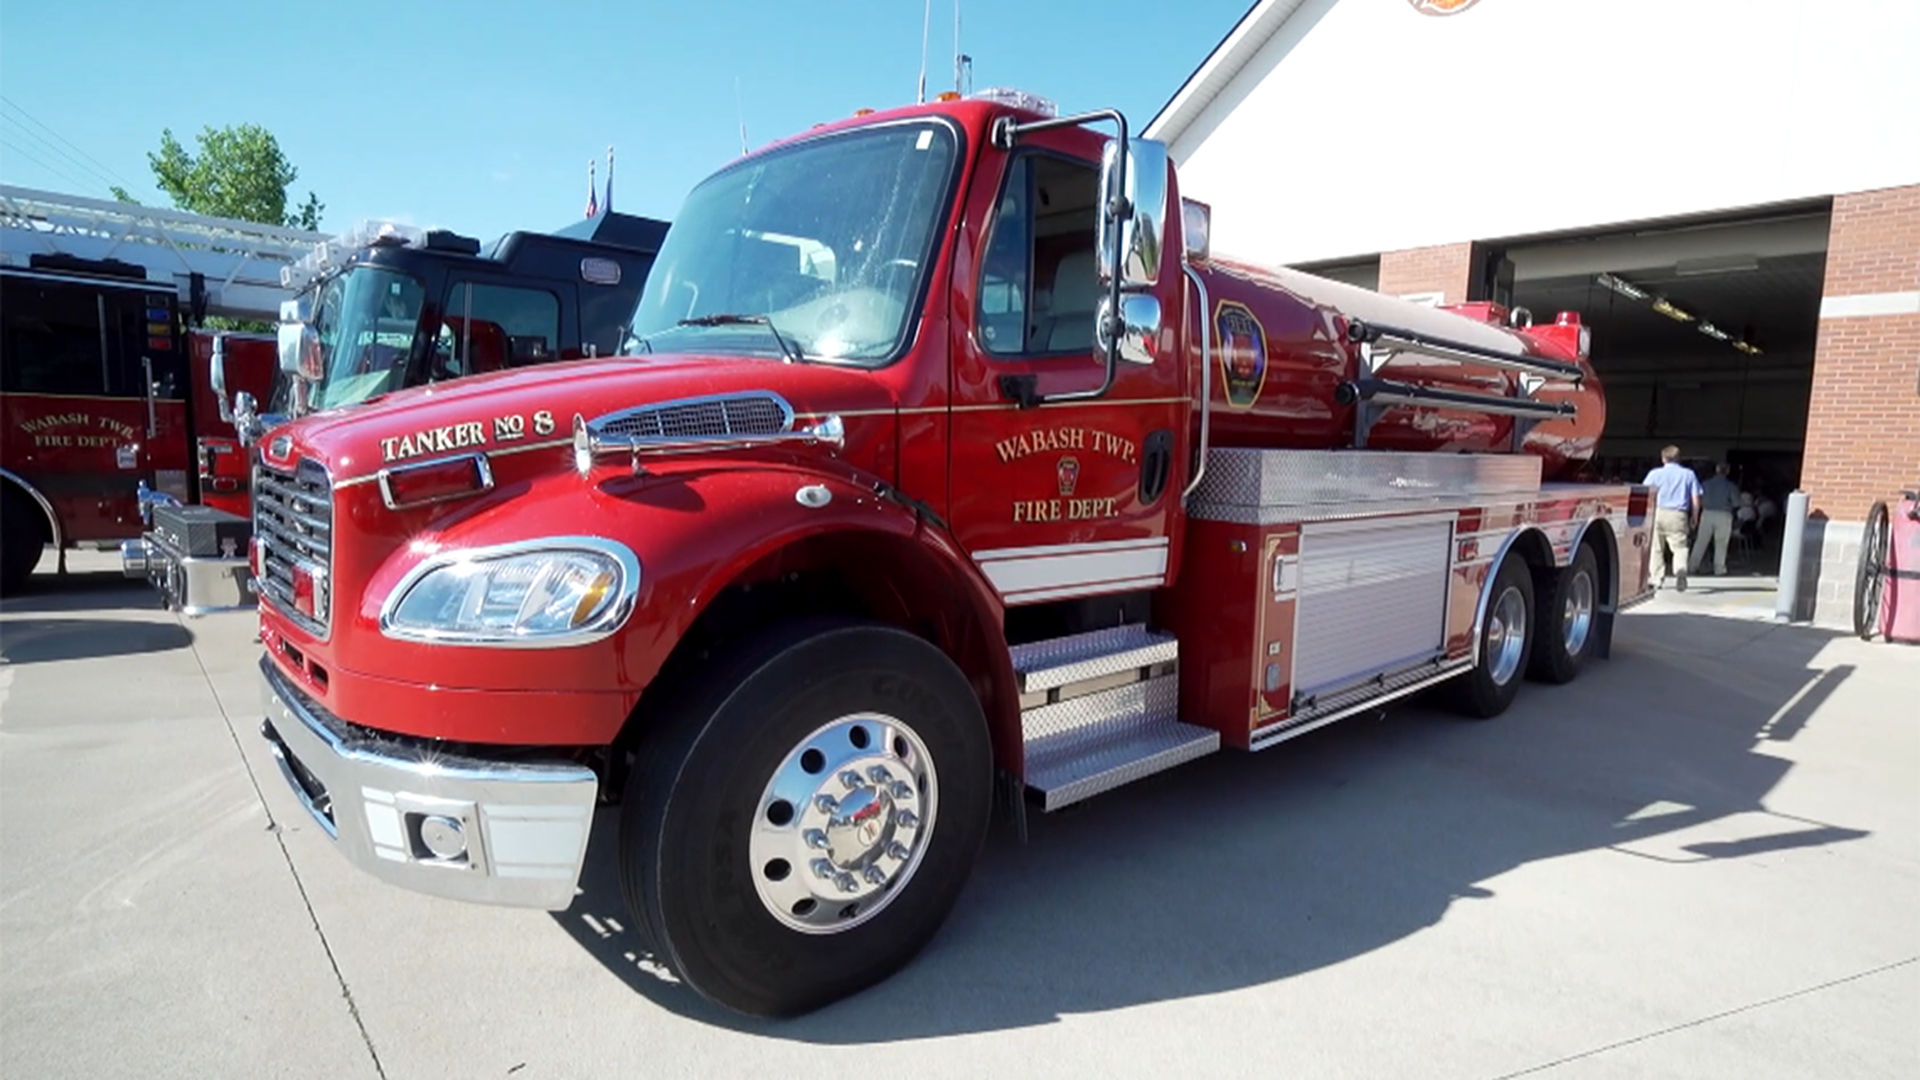 Four Wabash Township firefighters are headed back to work after the now-removed town trustee took them off the payroll.